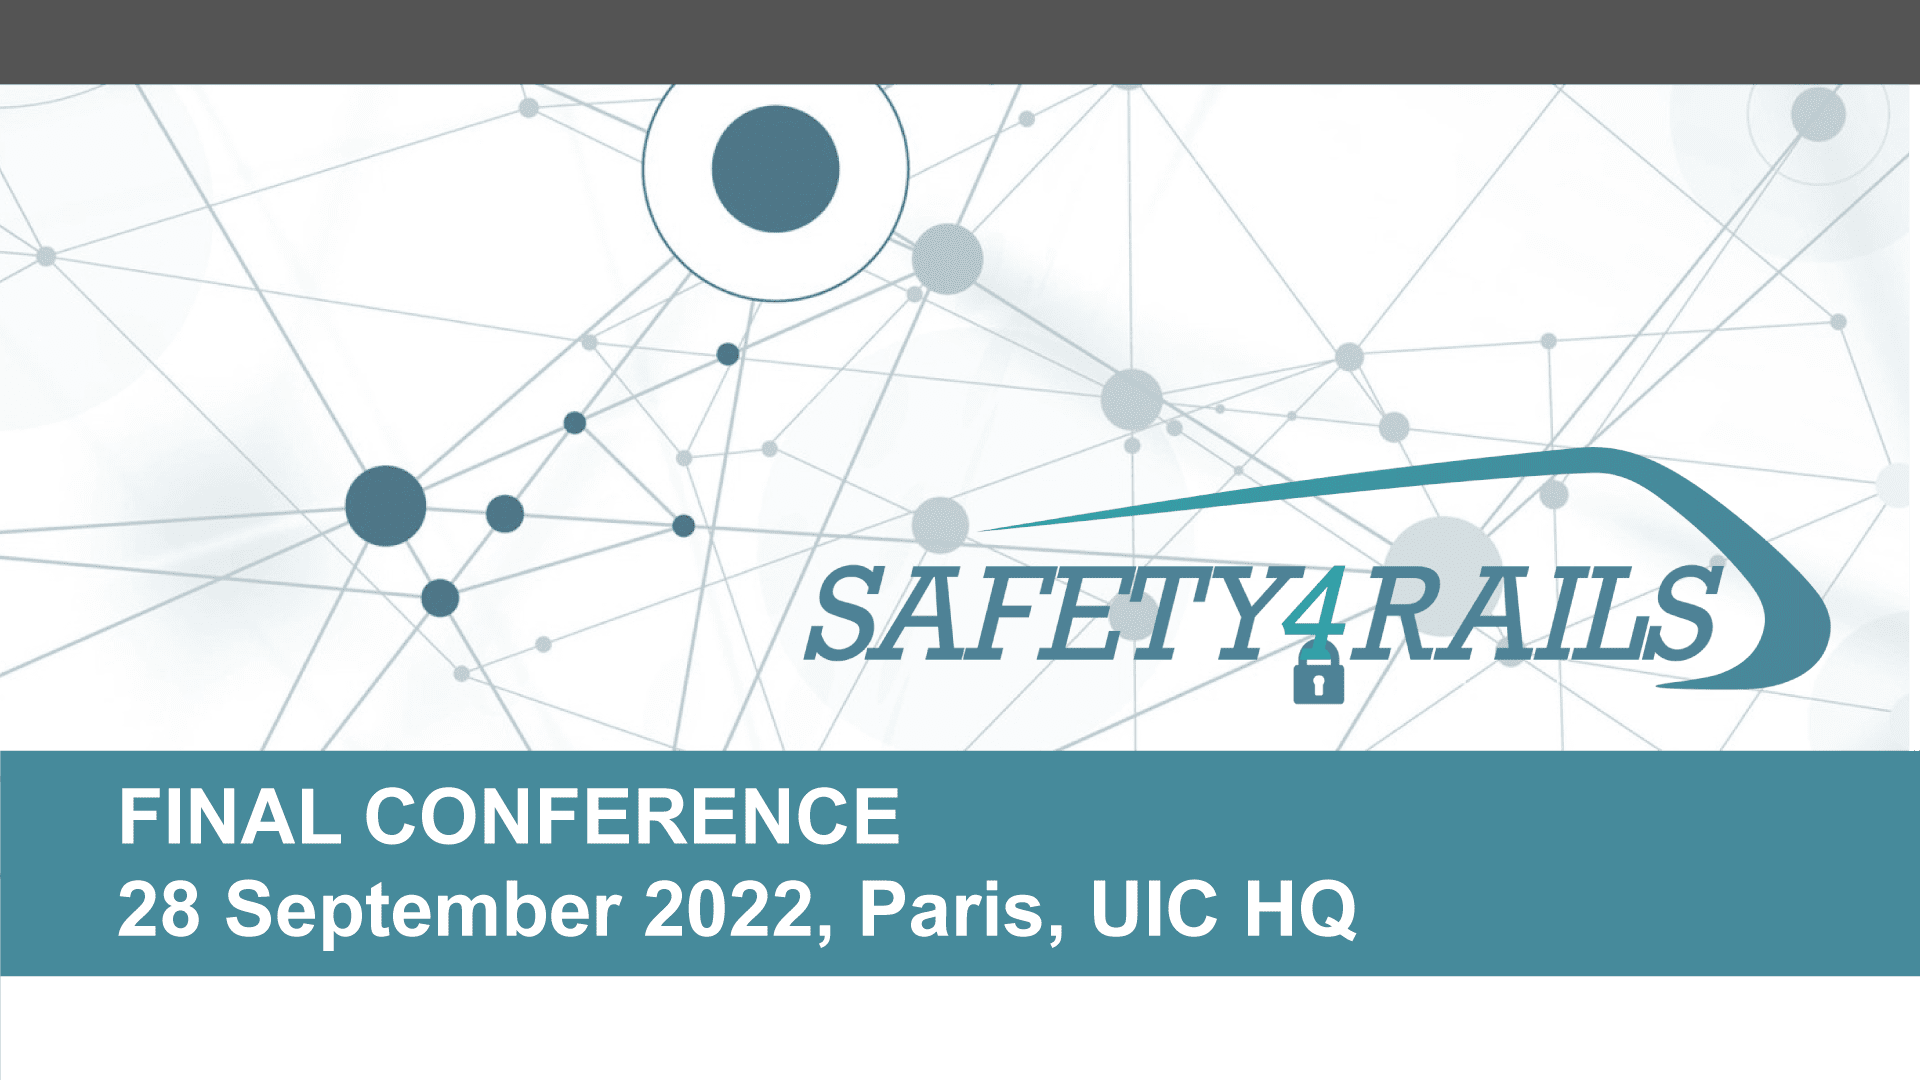 SAFETY4RAILS Final conference will be held on 28 September in Paris, France at UIC HQ